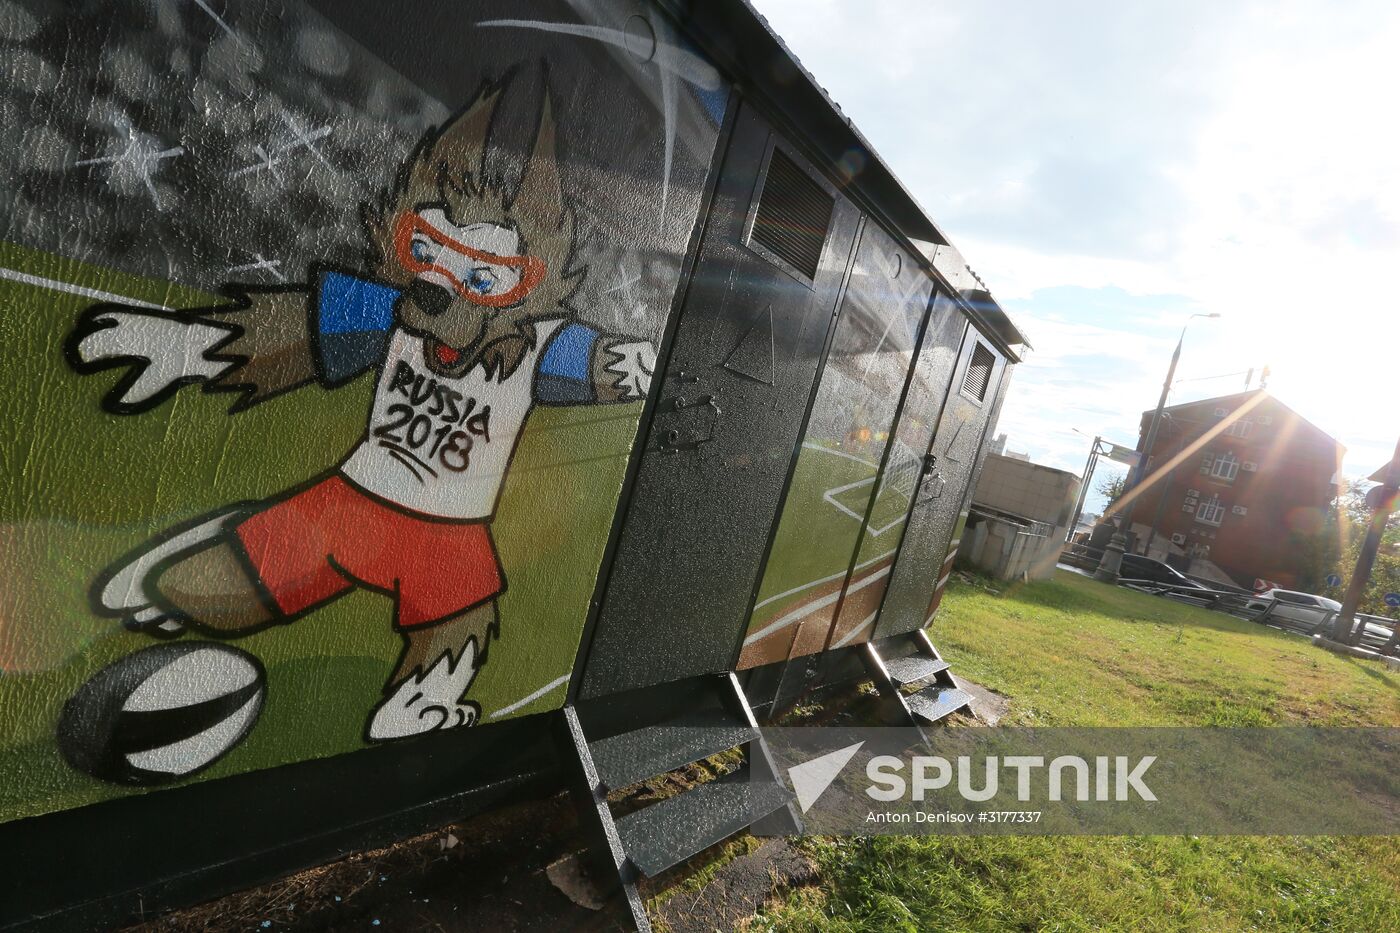 Graffiti dedicated to 2018 World Cup appears in Moscow